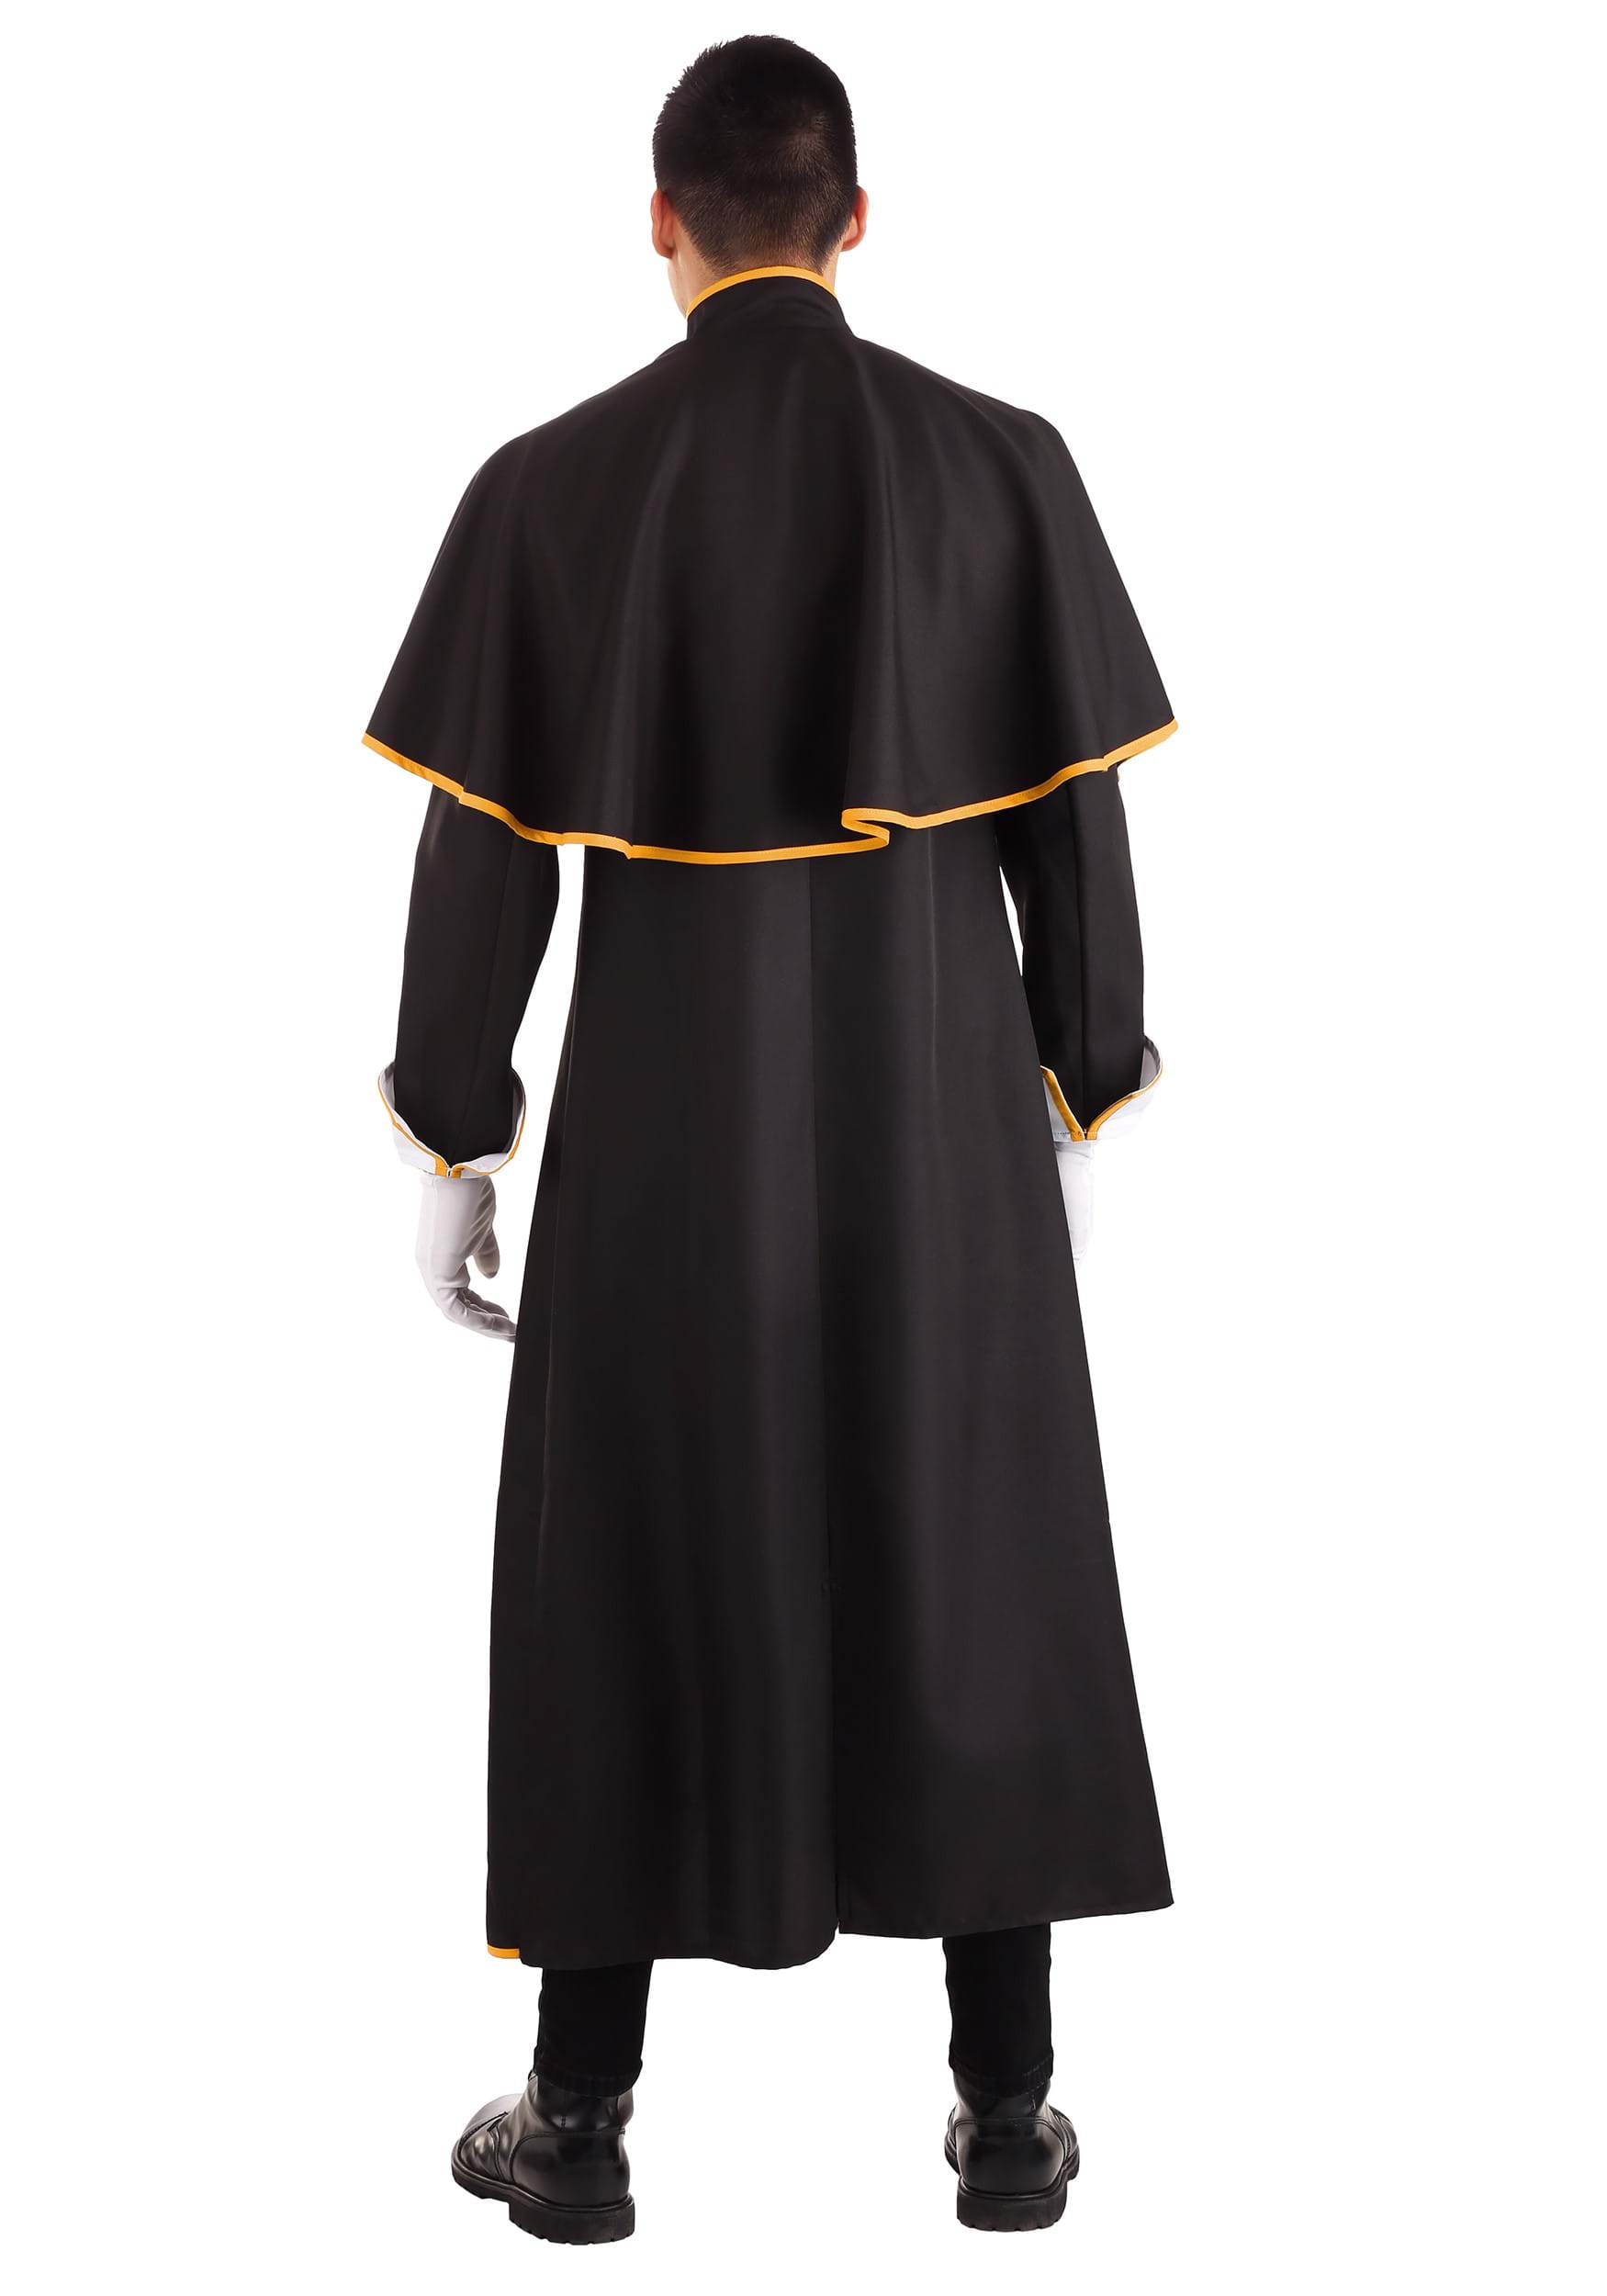 Holy Priest Adult Fancy Dress Costume